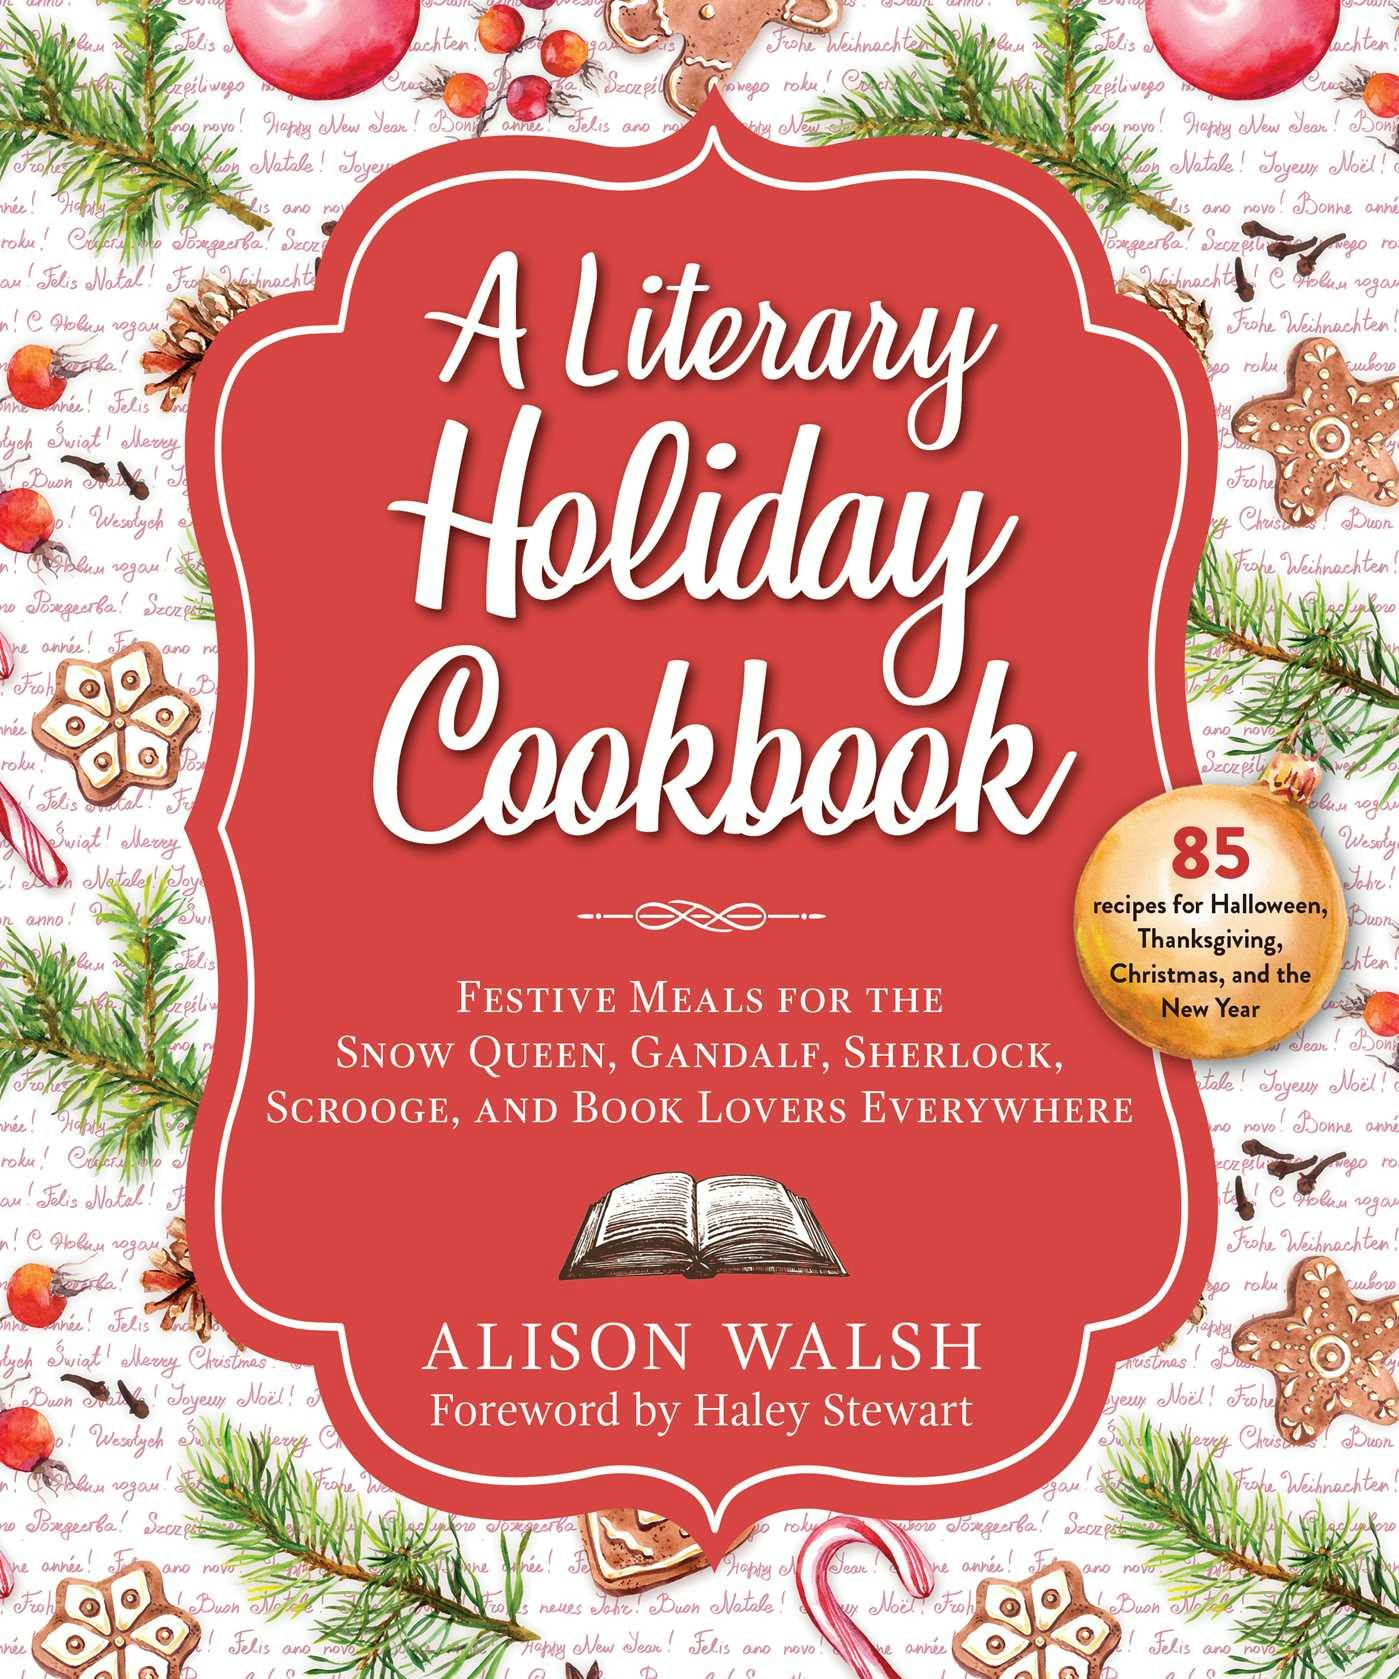 A Literary Holiday Cookbook: Festive Meals for the Snow Queen, Gandalf, Sherlock, Scrooge, and Book Lovers Everywhere - Alison Walsh